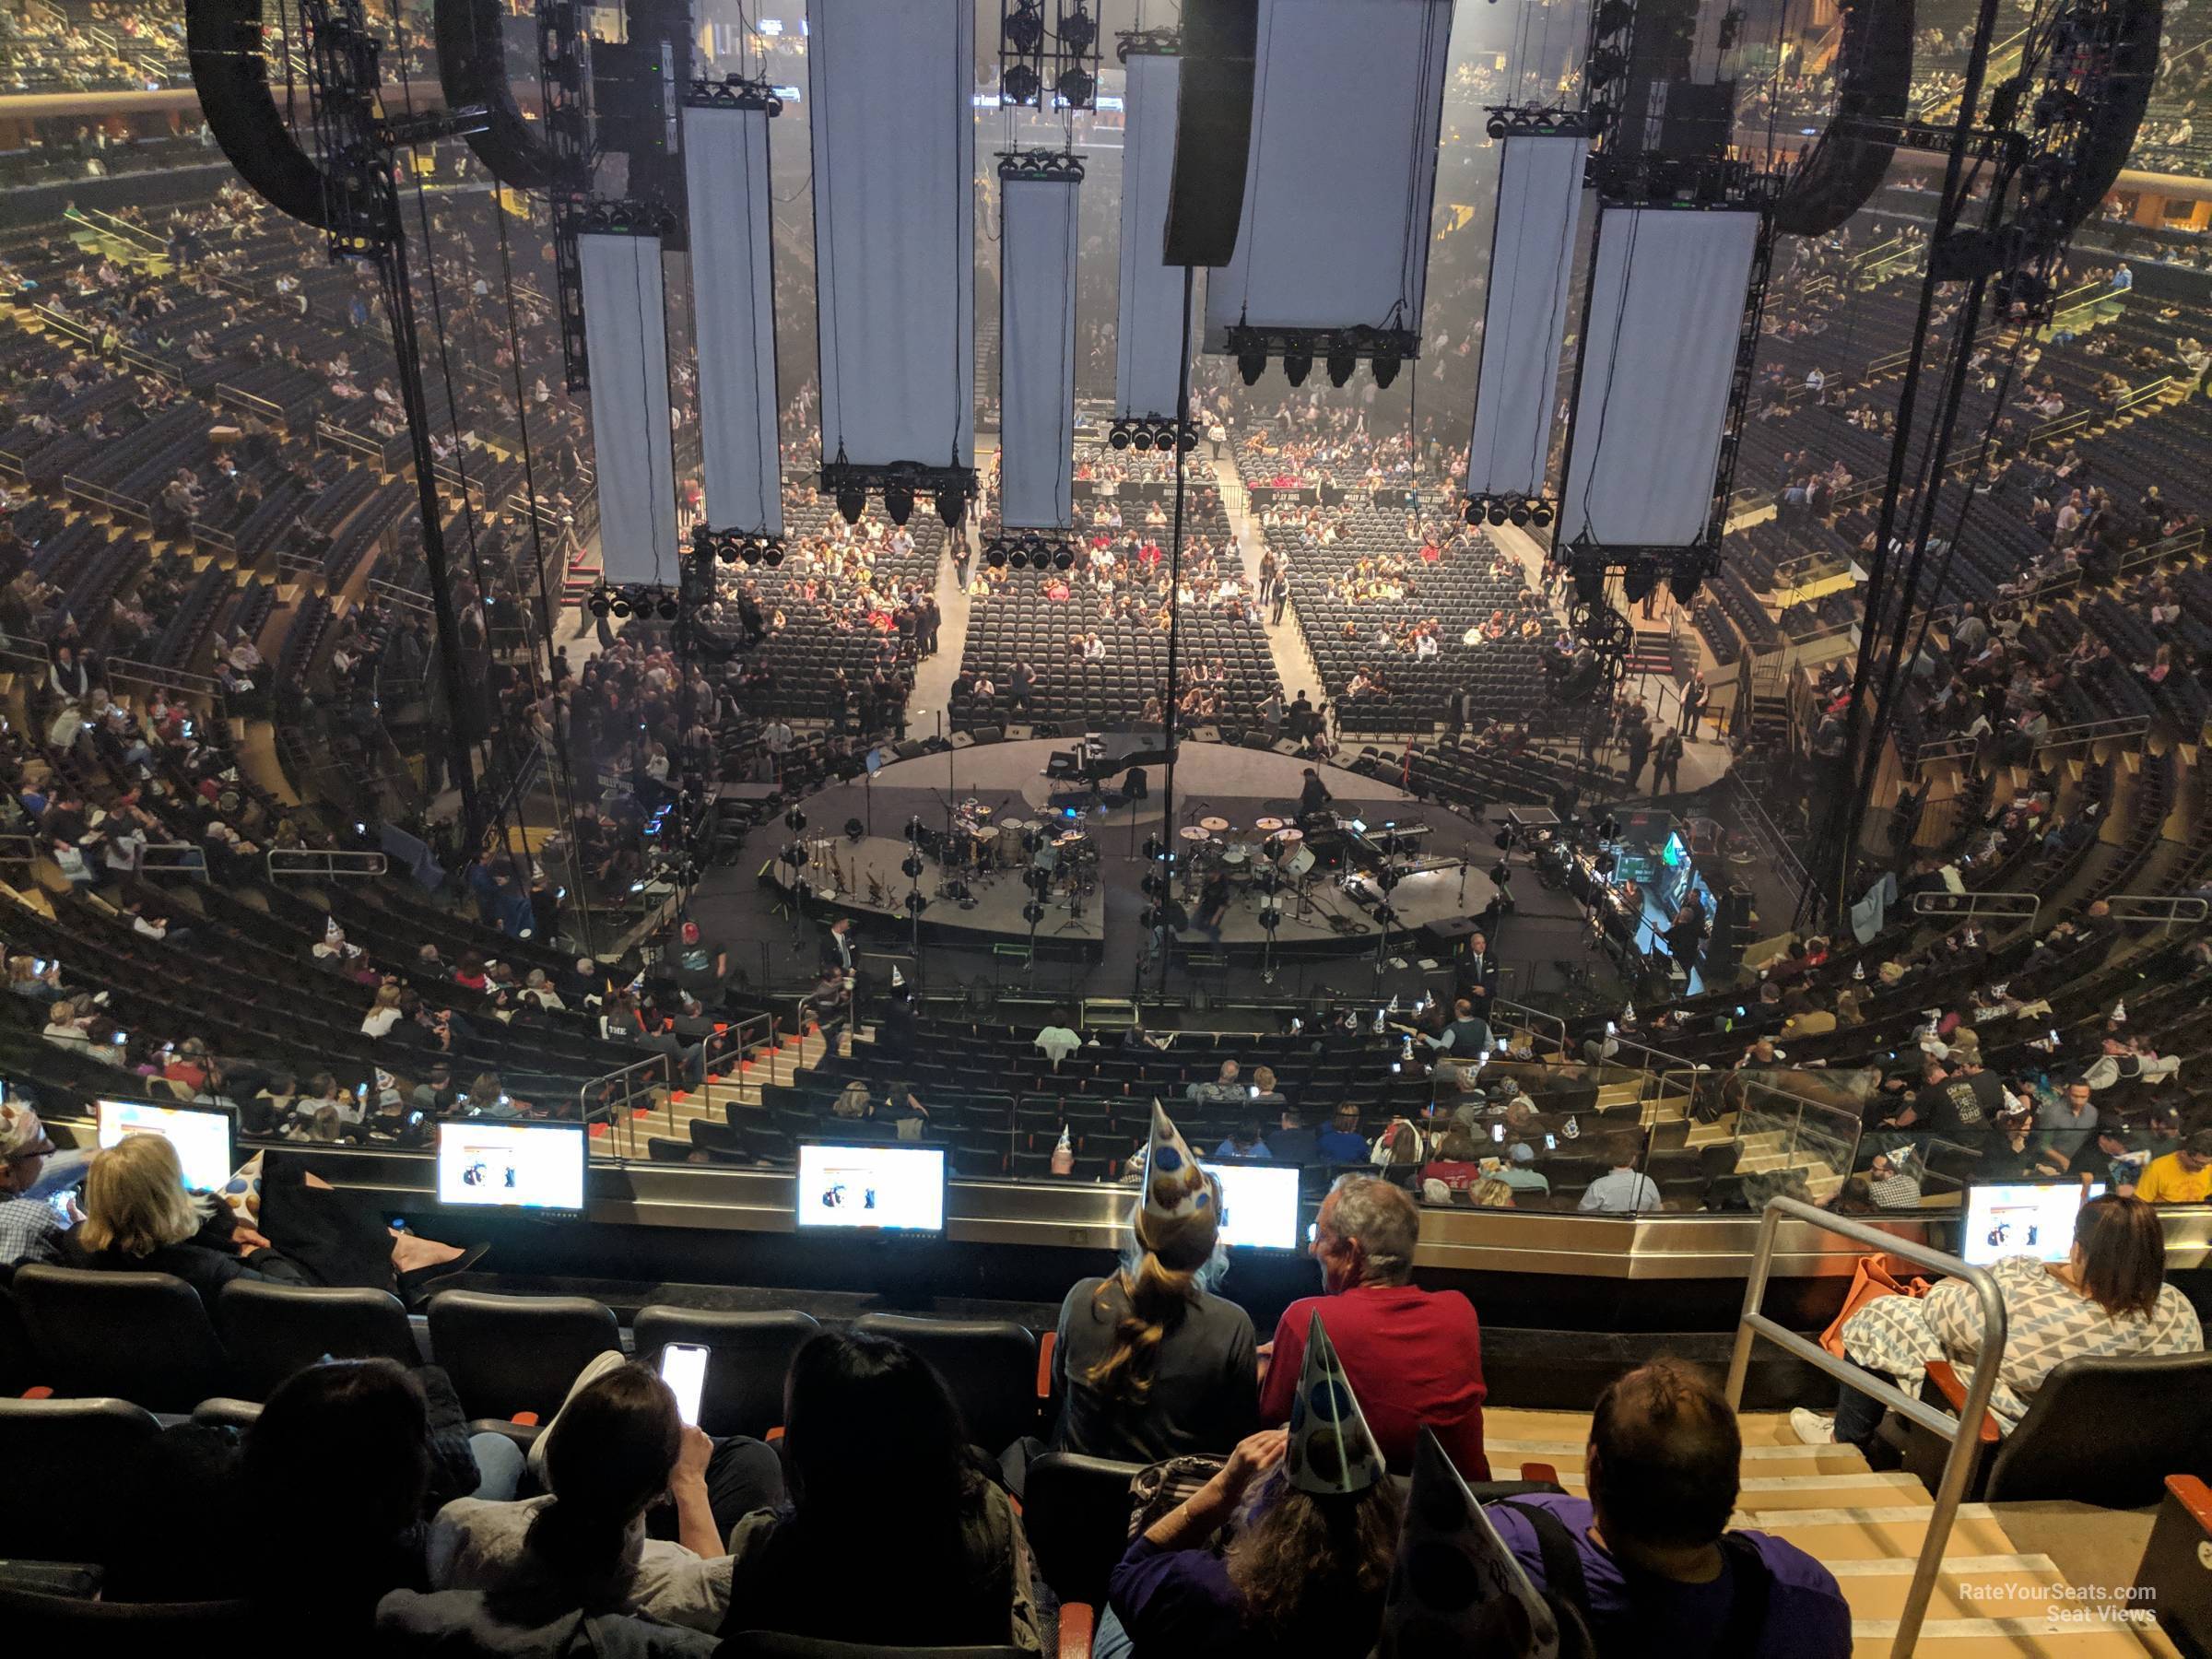 section 217, row 5 seat view  for concert - madison square garden